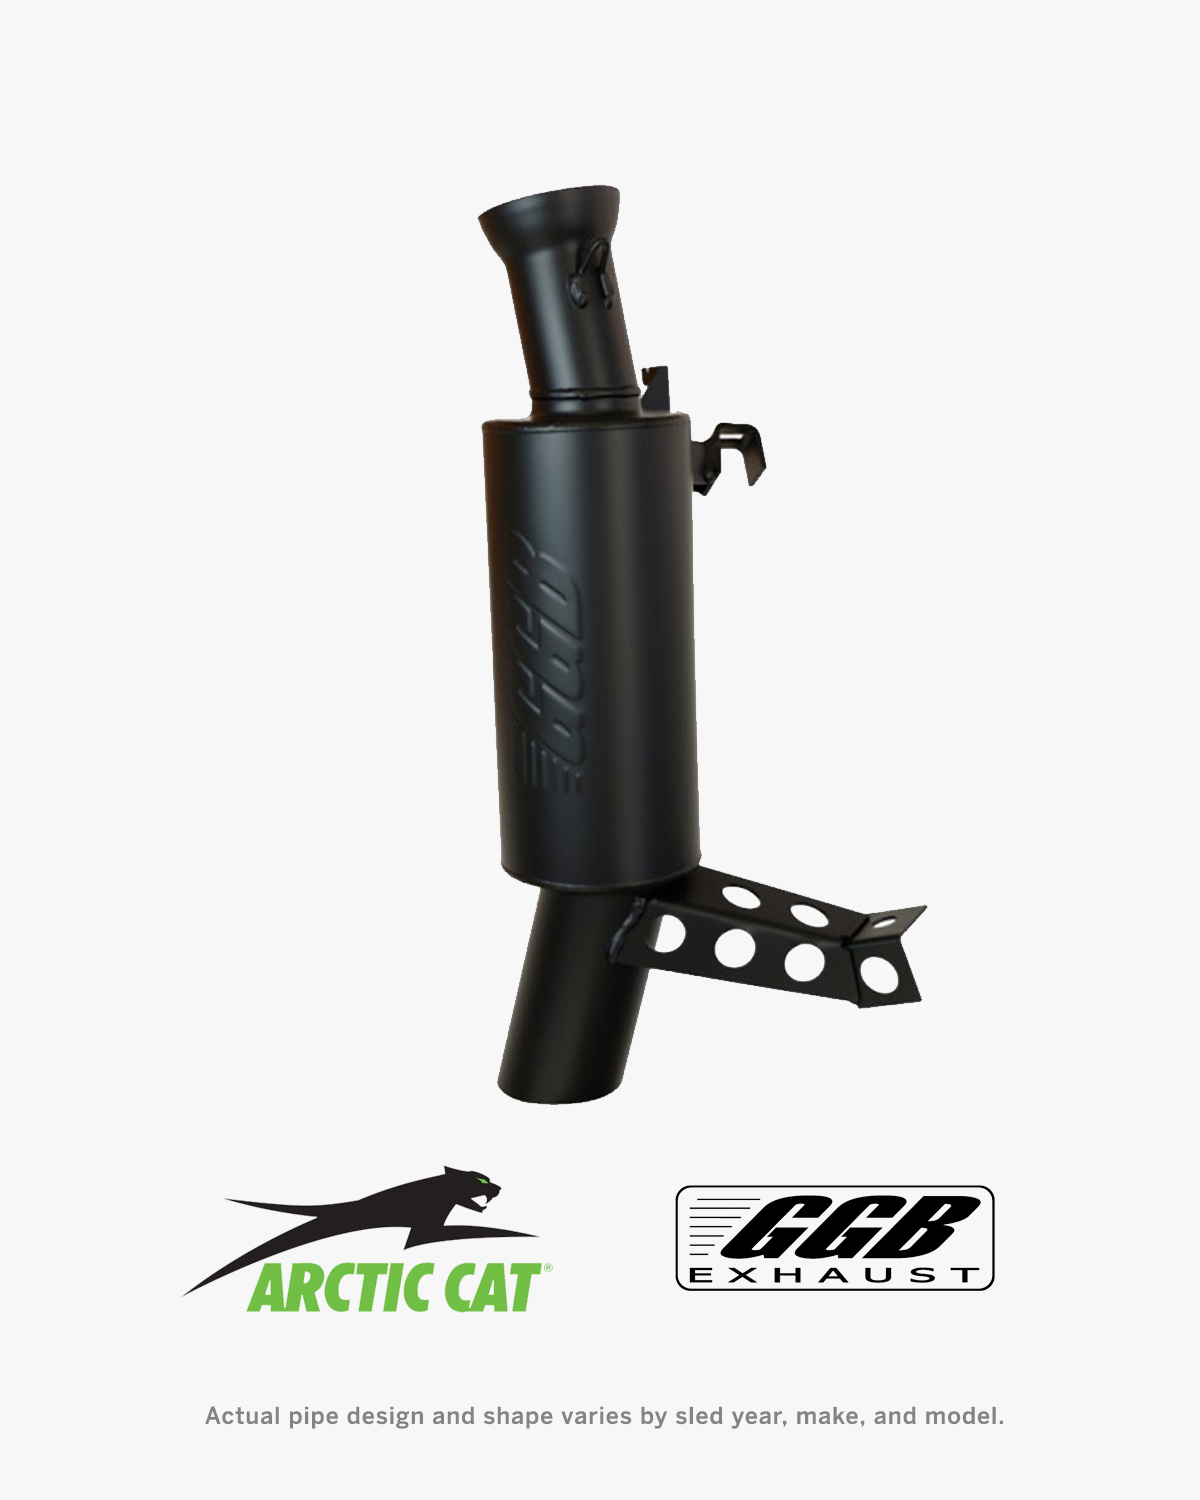 Picture of GGB Trail Exhaust for Arctic Cat Snowmobiles